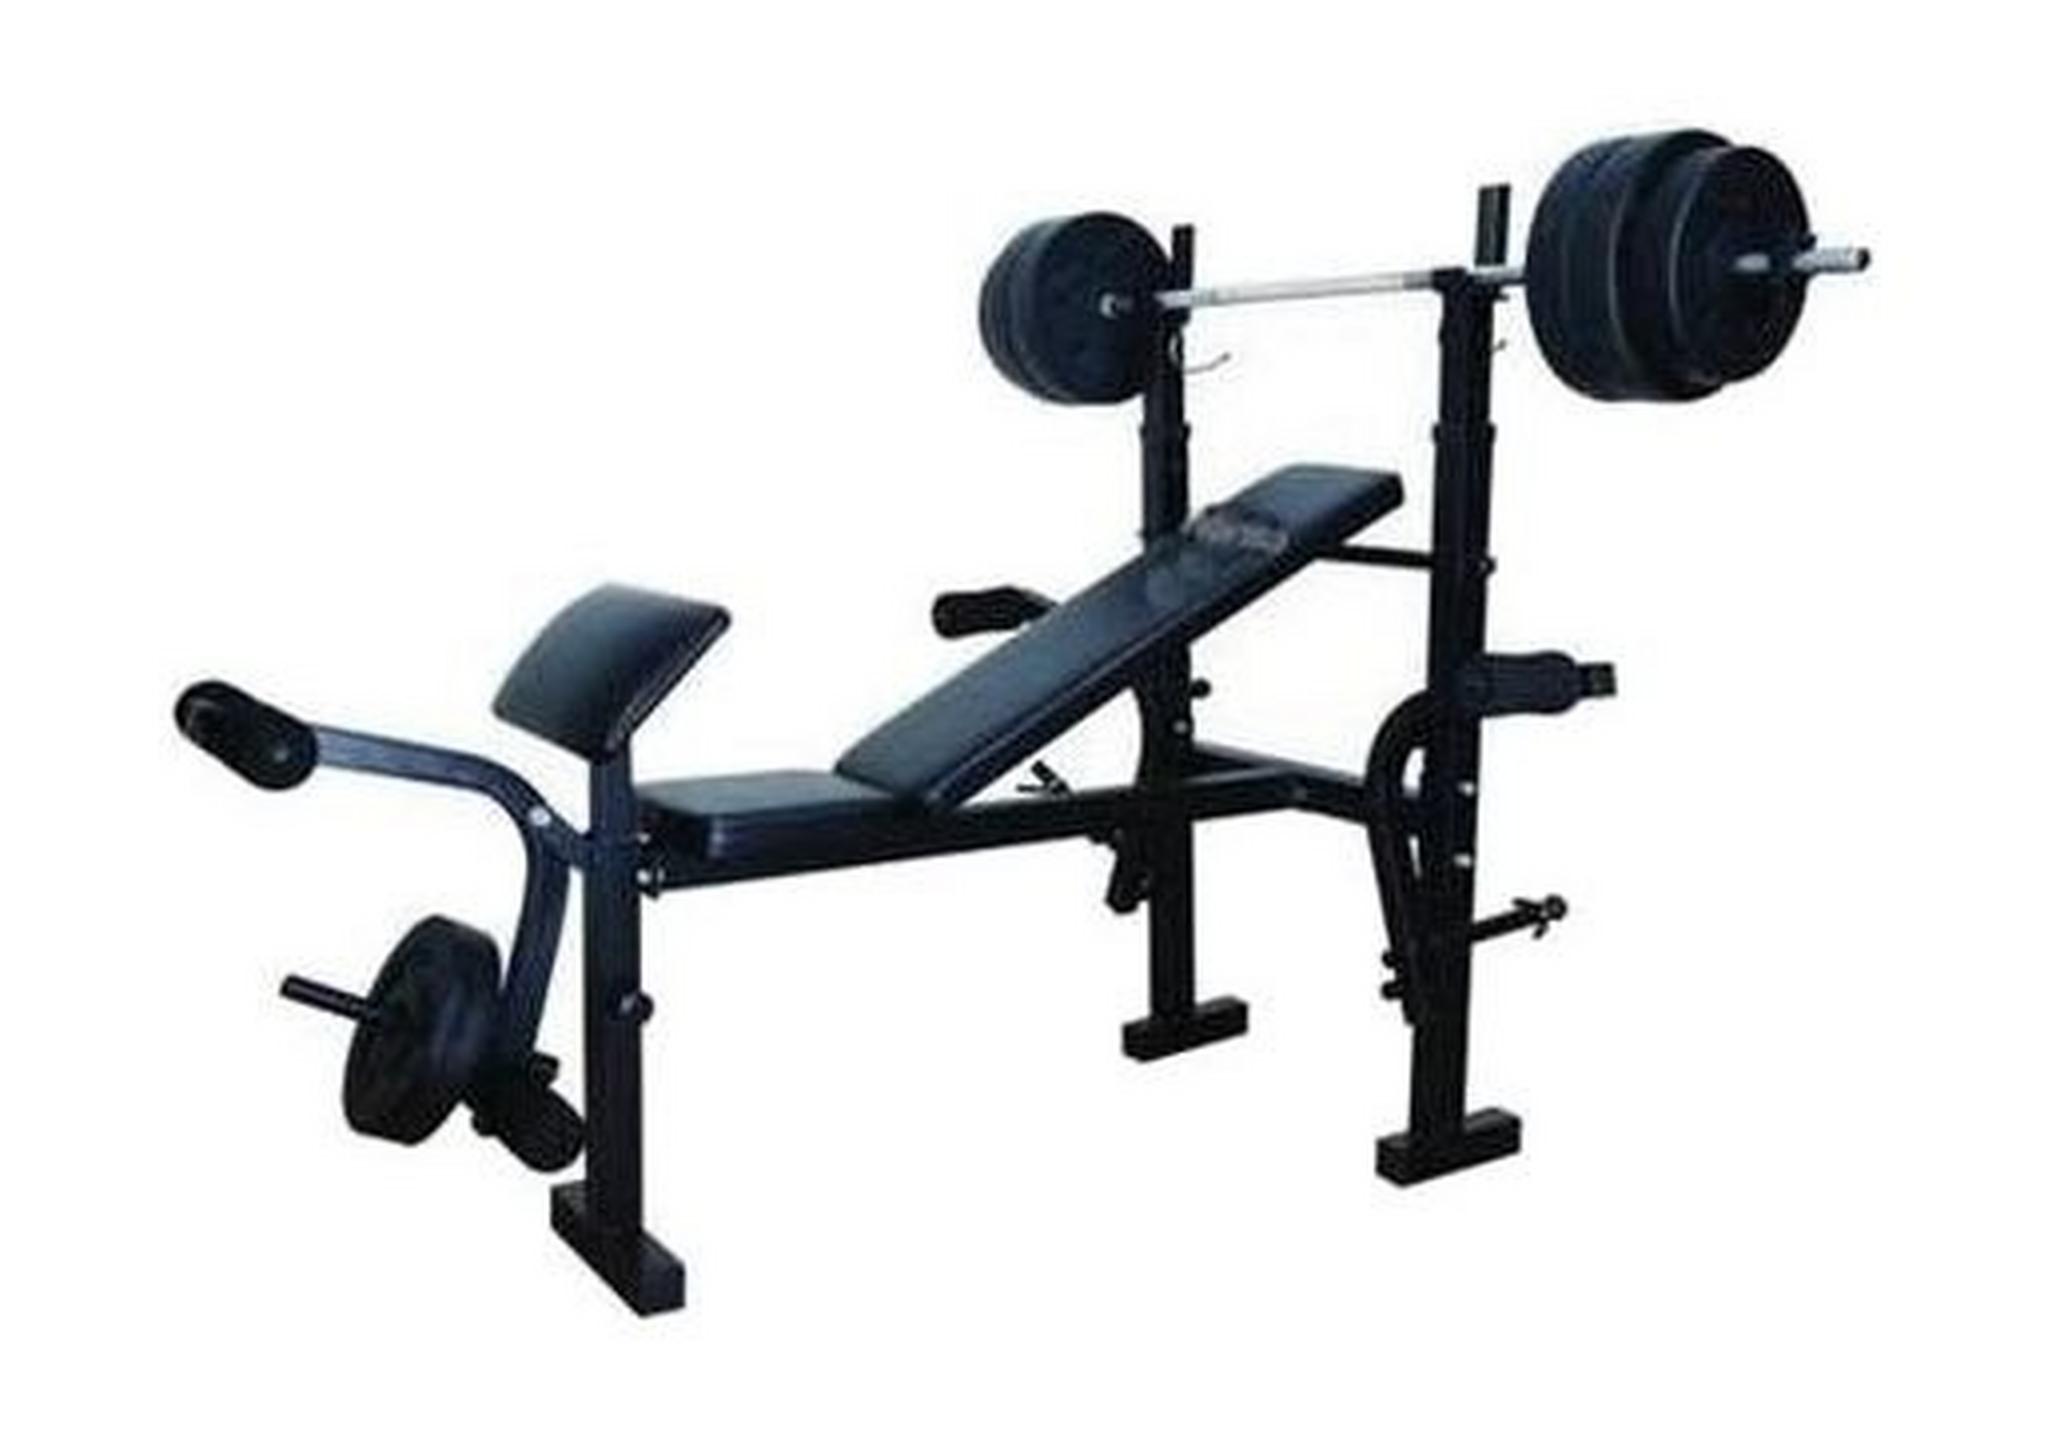 Wansa Fitness Exercise Bench With 50kg Weight Plates - Black